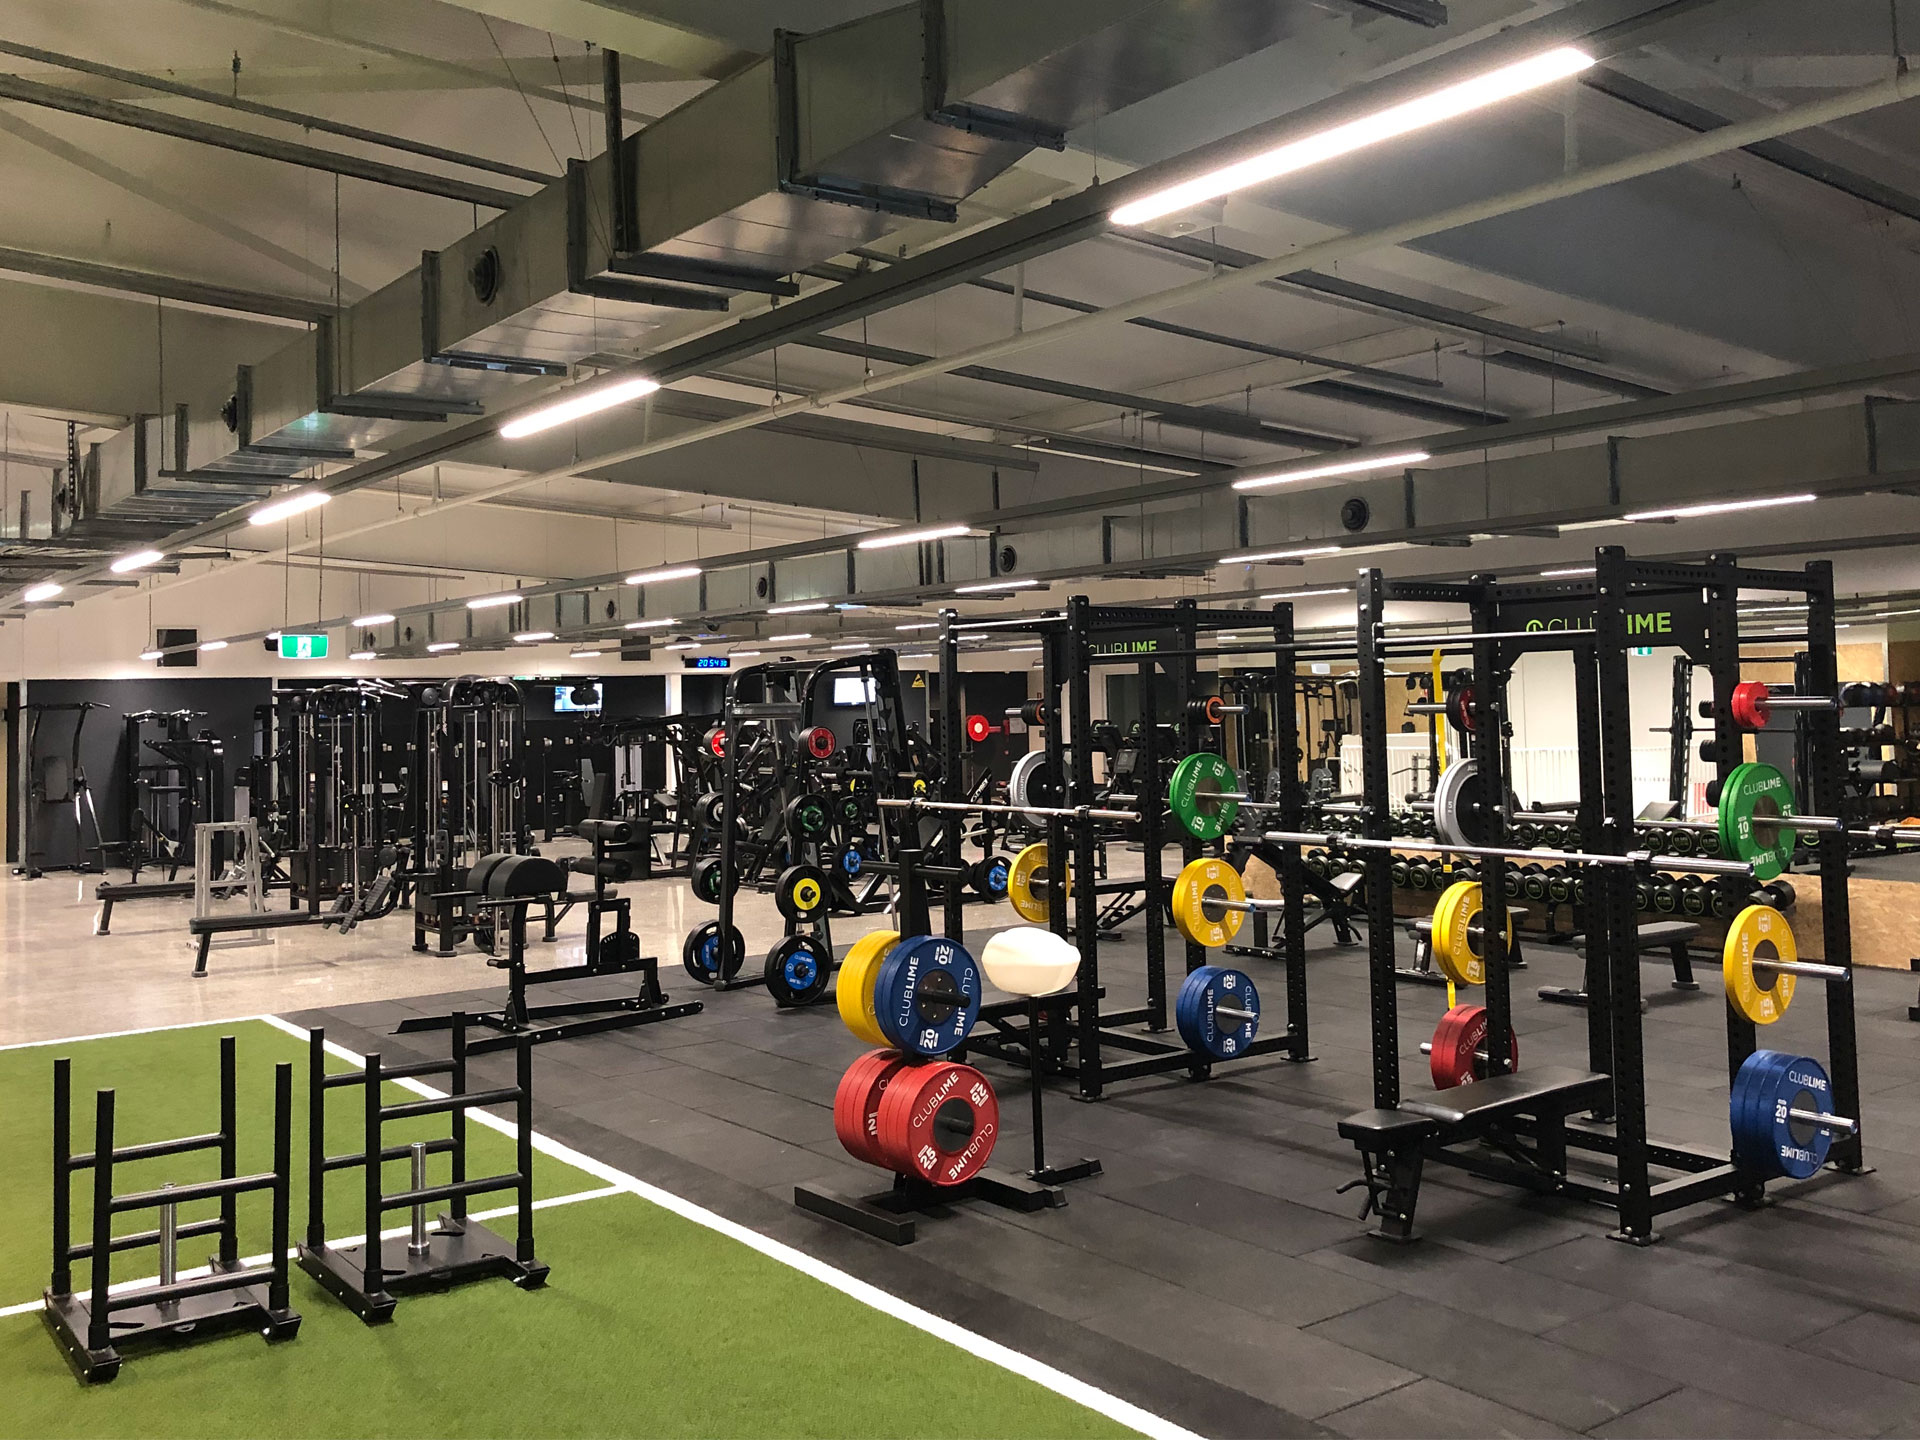 Club Lime Anu Commercial Gym Fitout